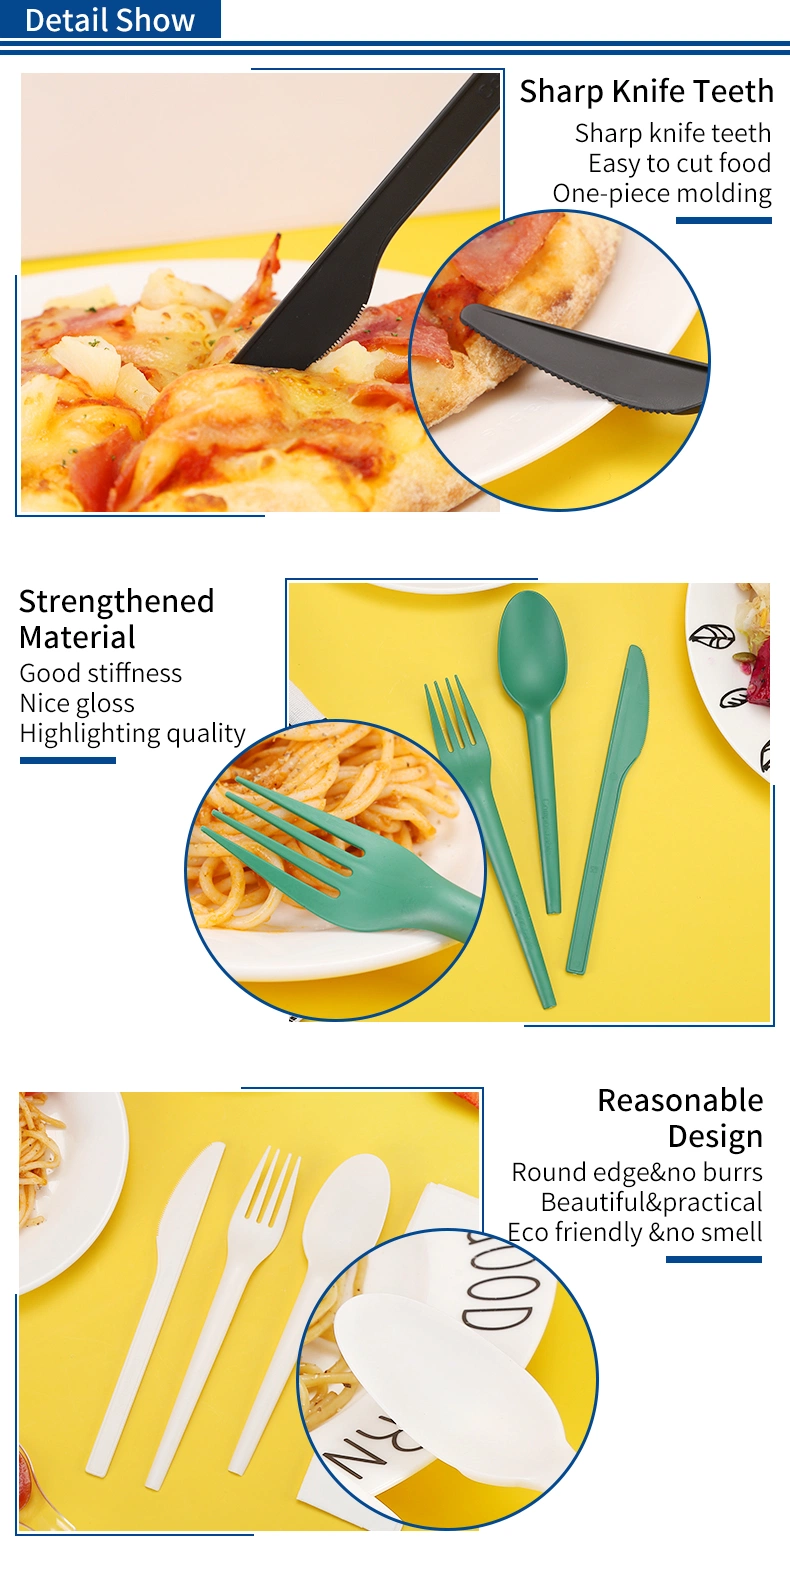 Quanhua Takeout Plastic Tableware Sets Factory Produces Degradable Disposable Tableware Sets